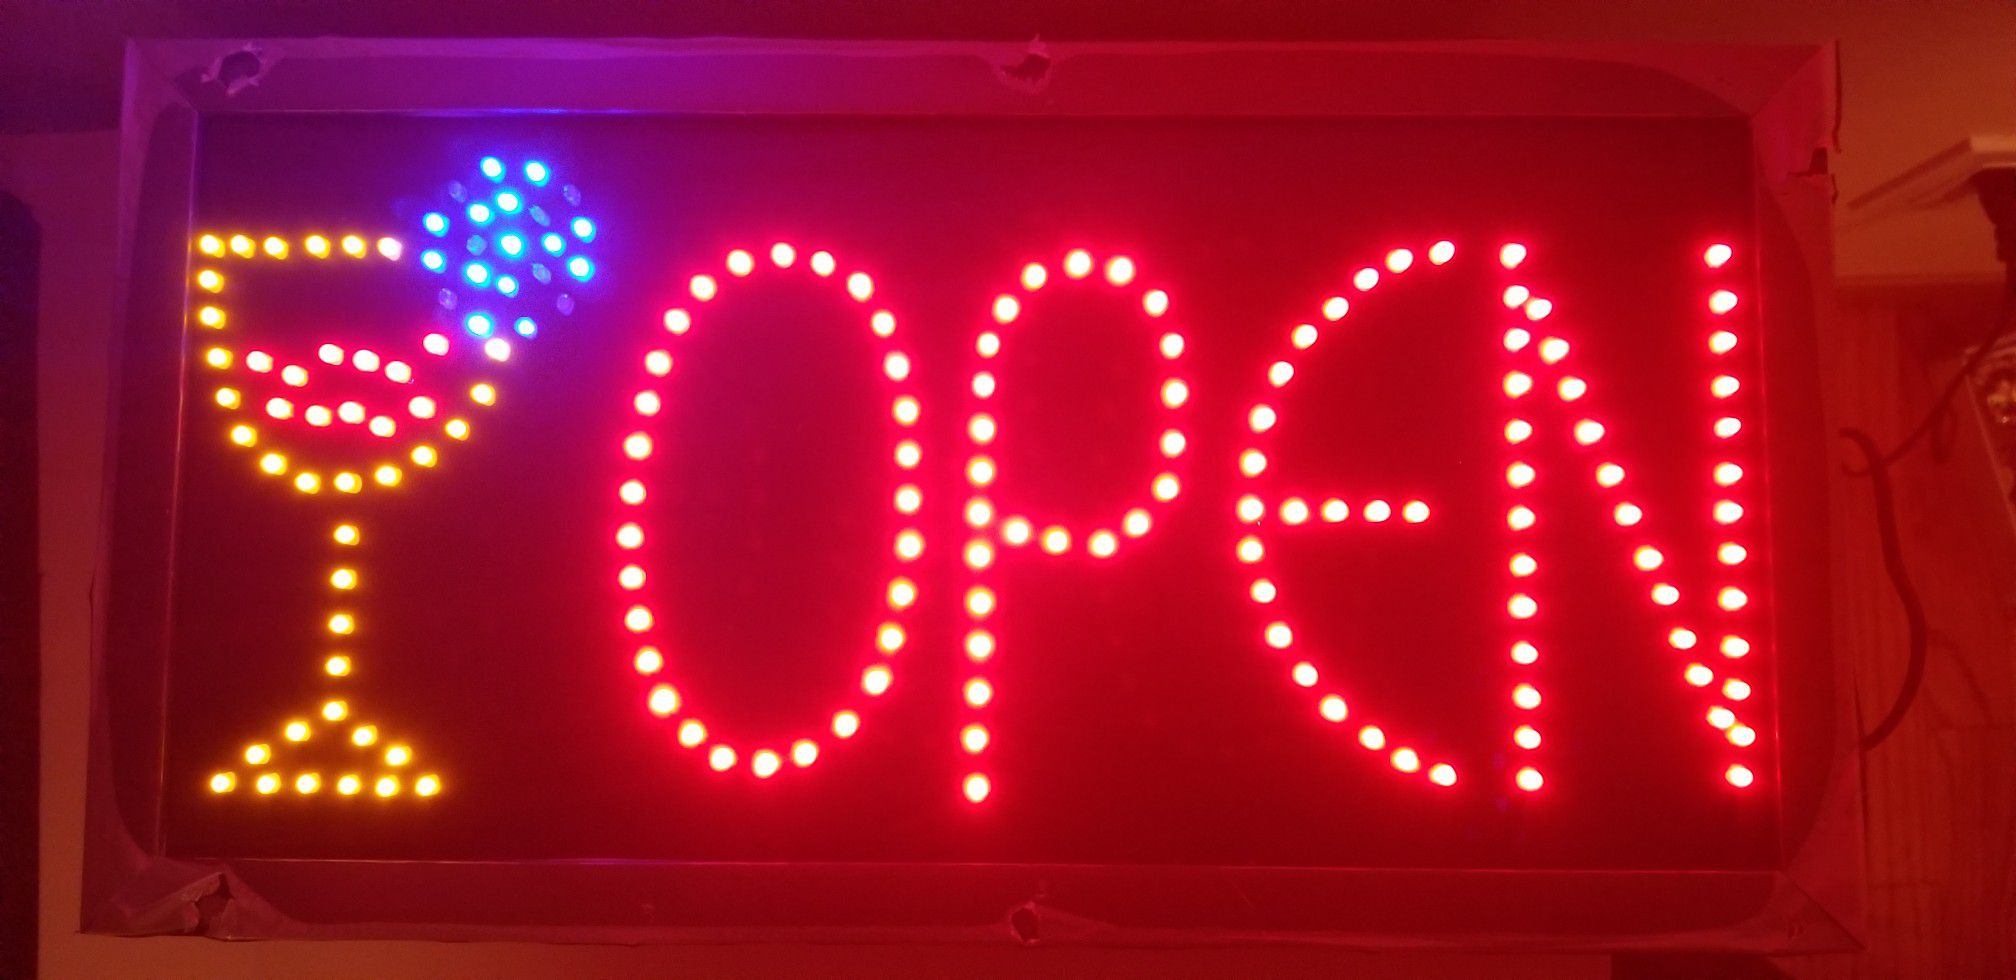 2 pics led "OPEN" business sign